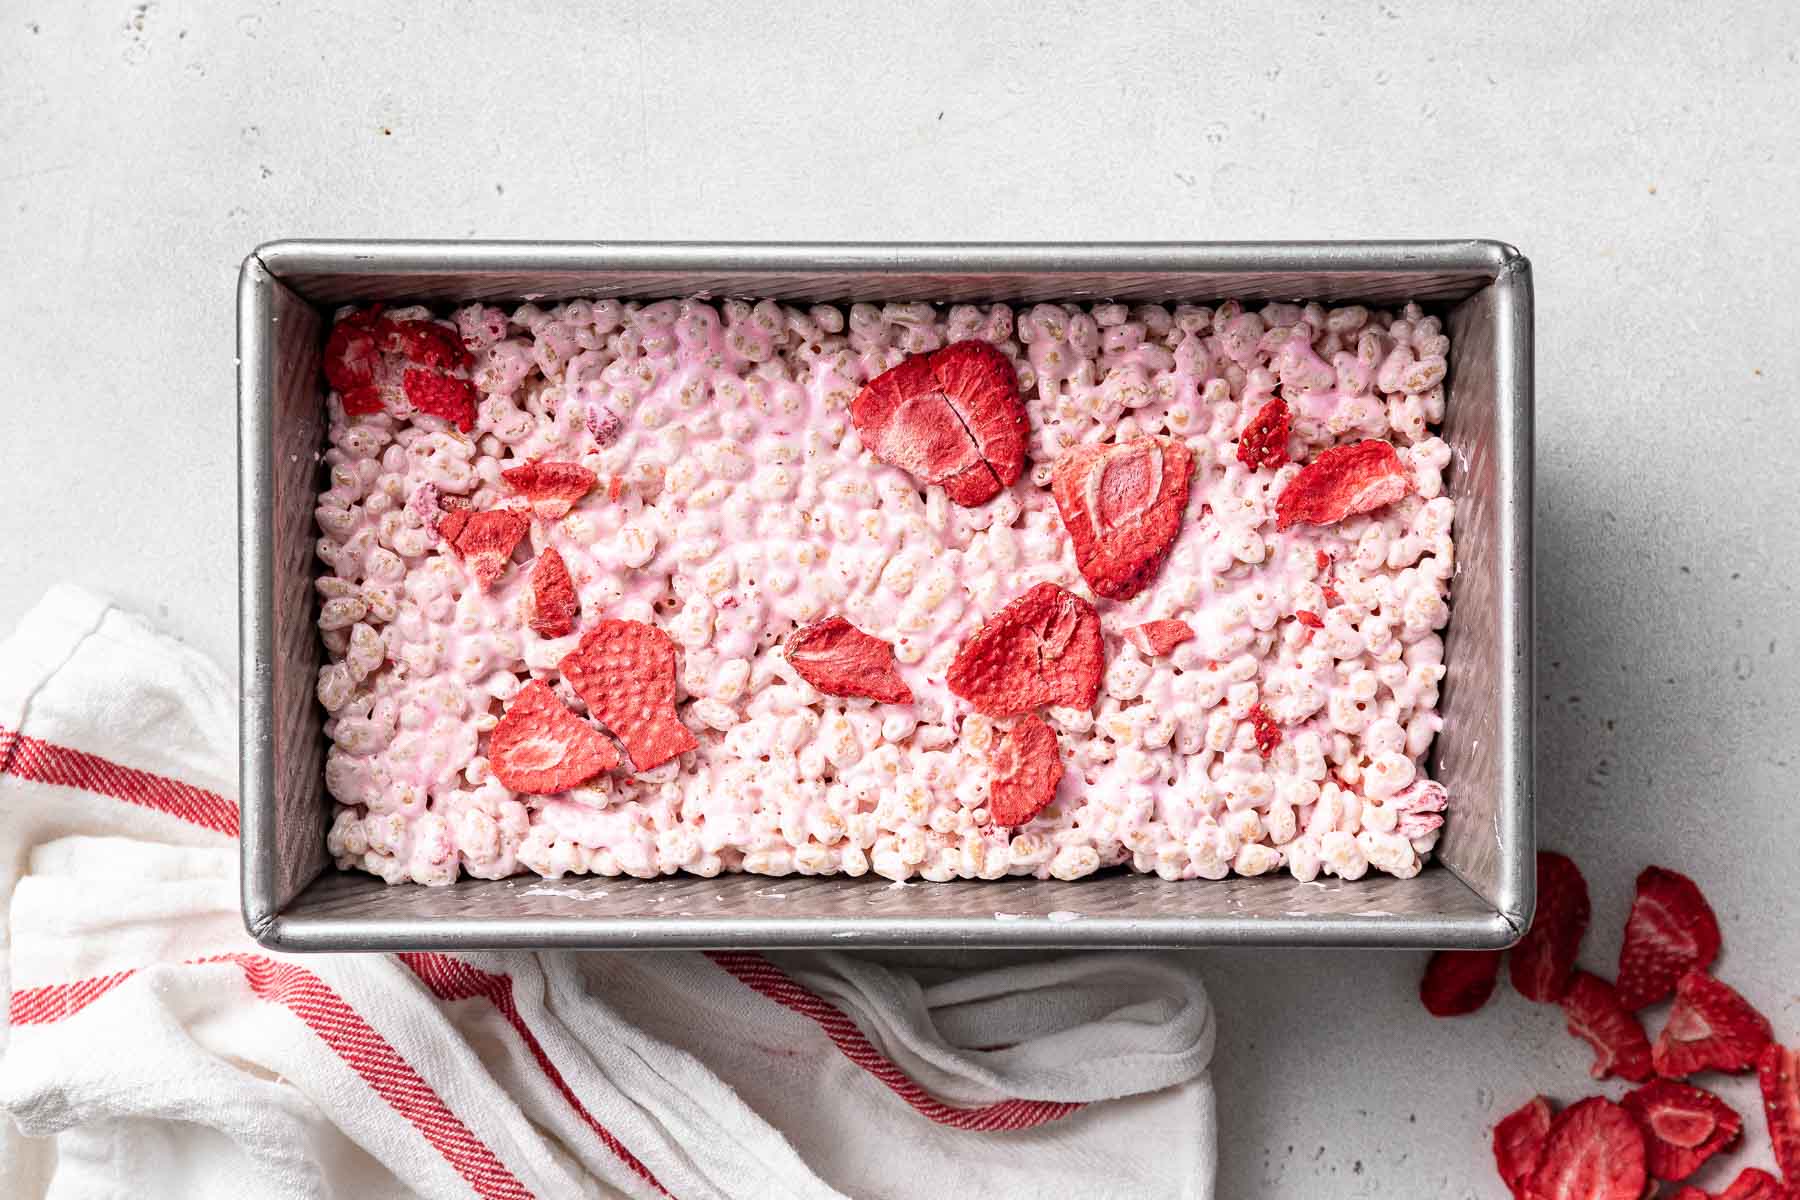 Pink Rice Krispie treats with strawberry slices on top in a loaf pan.